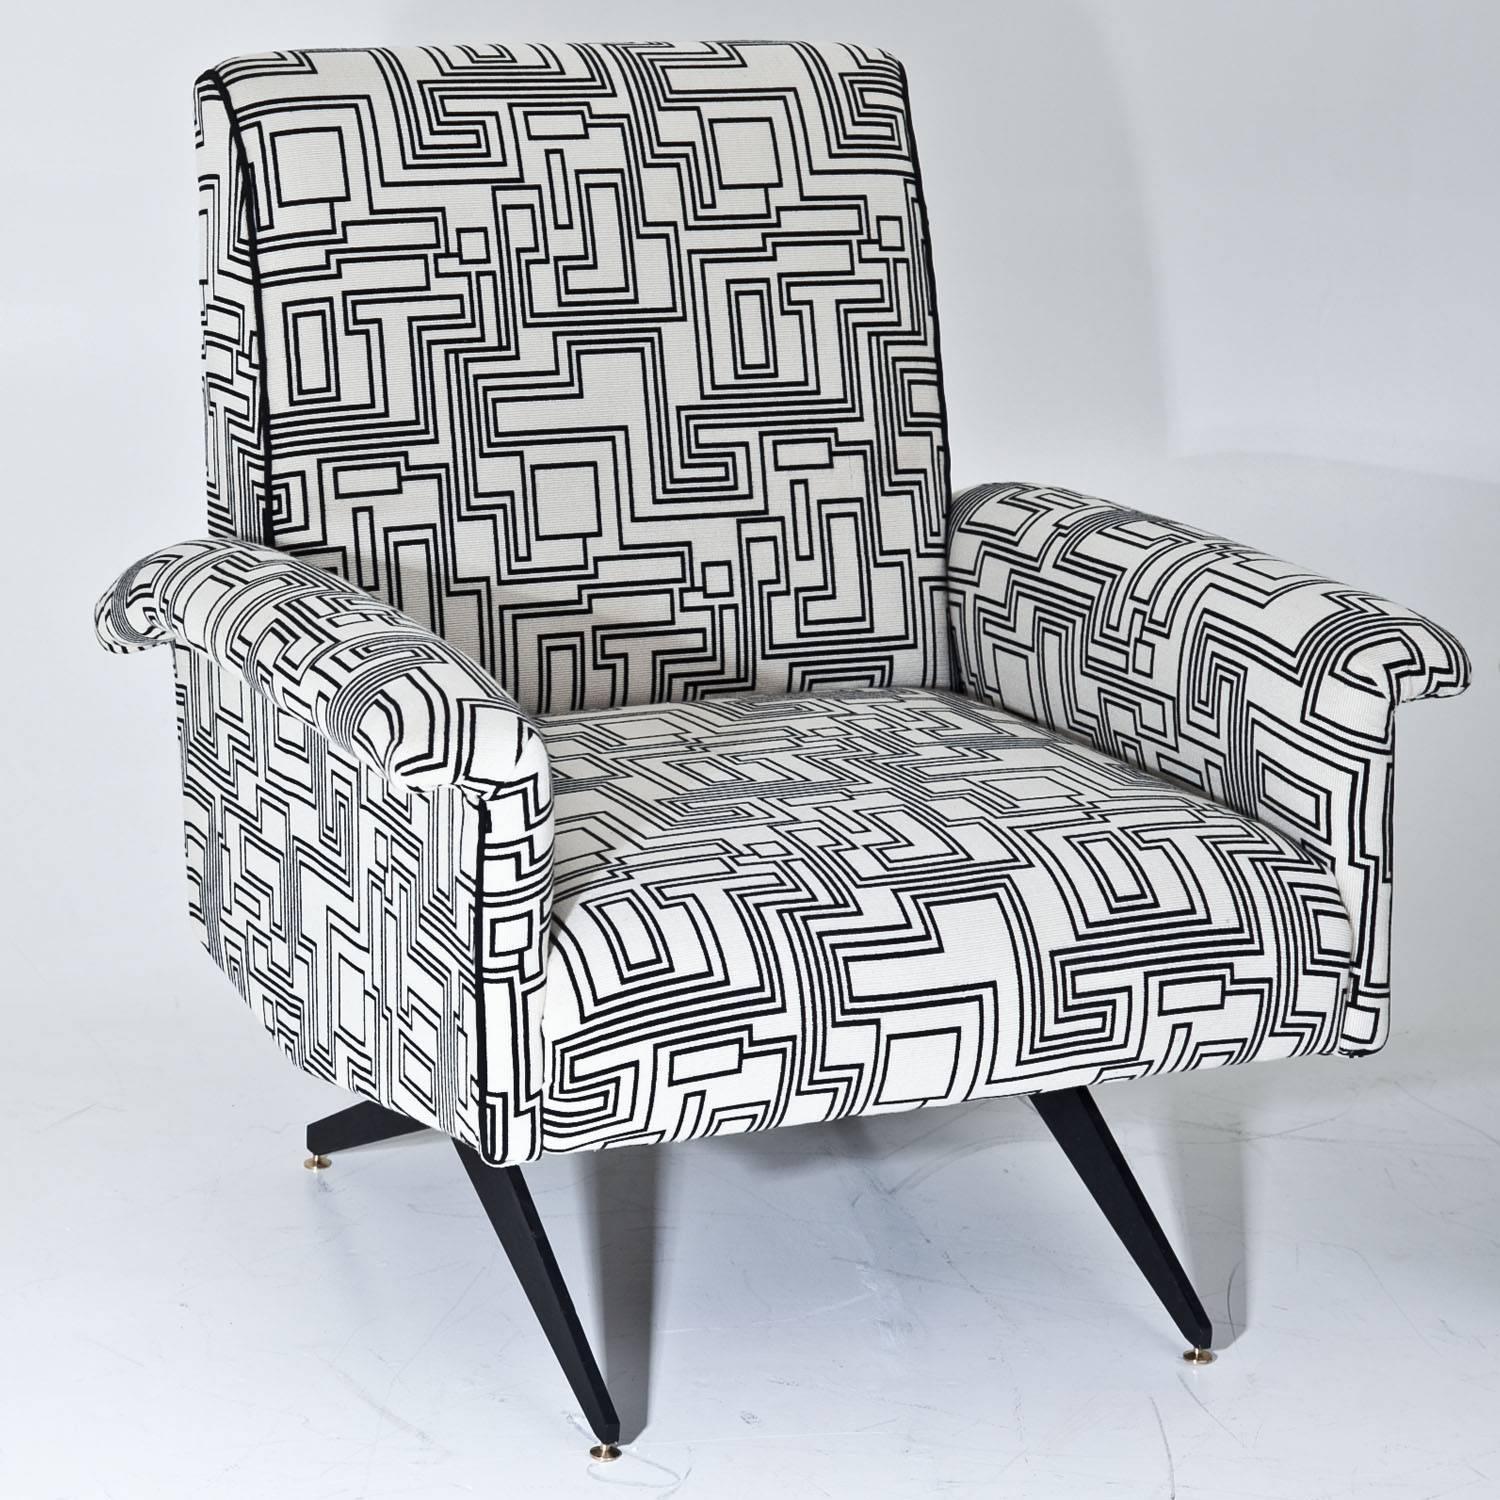 Pair of lounge chairs, standing on black metal legs with brass feet and thickly cushioned seats and backrests. The armrests are slightly curved. The armchairs were reupholstered with a high quality black-and-white patterned fabric by designer Eley